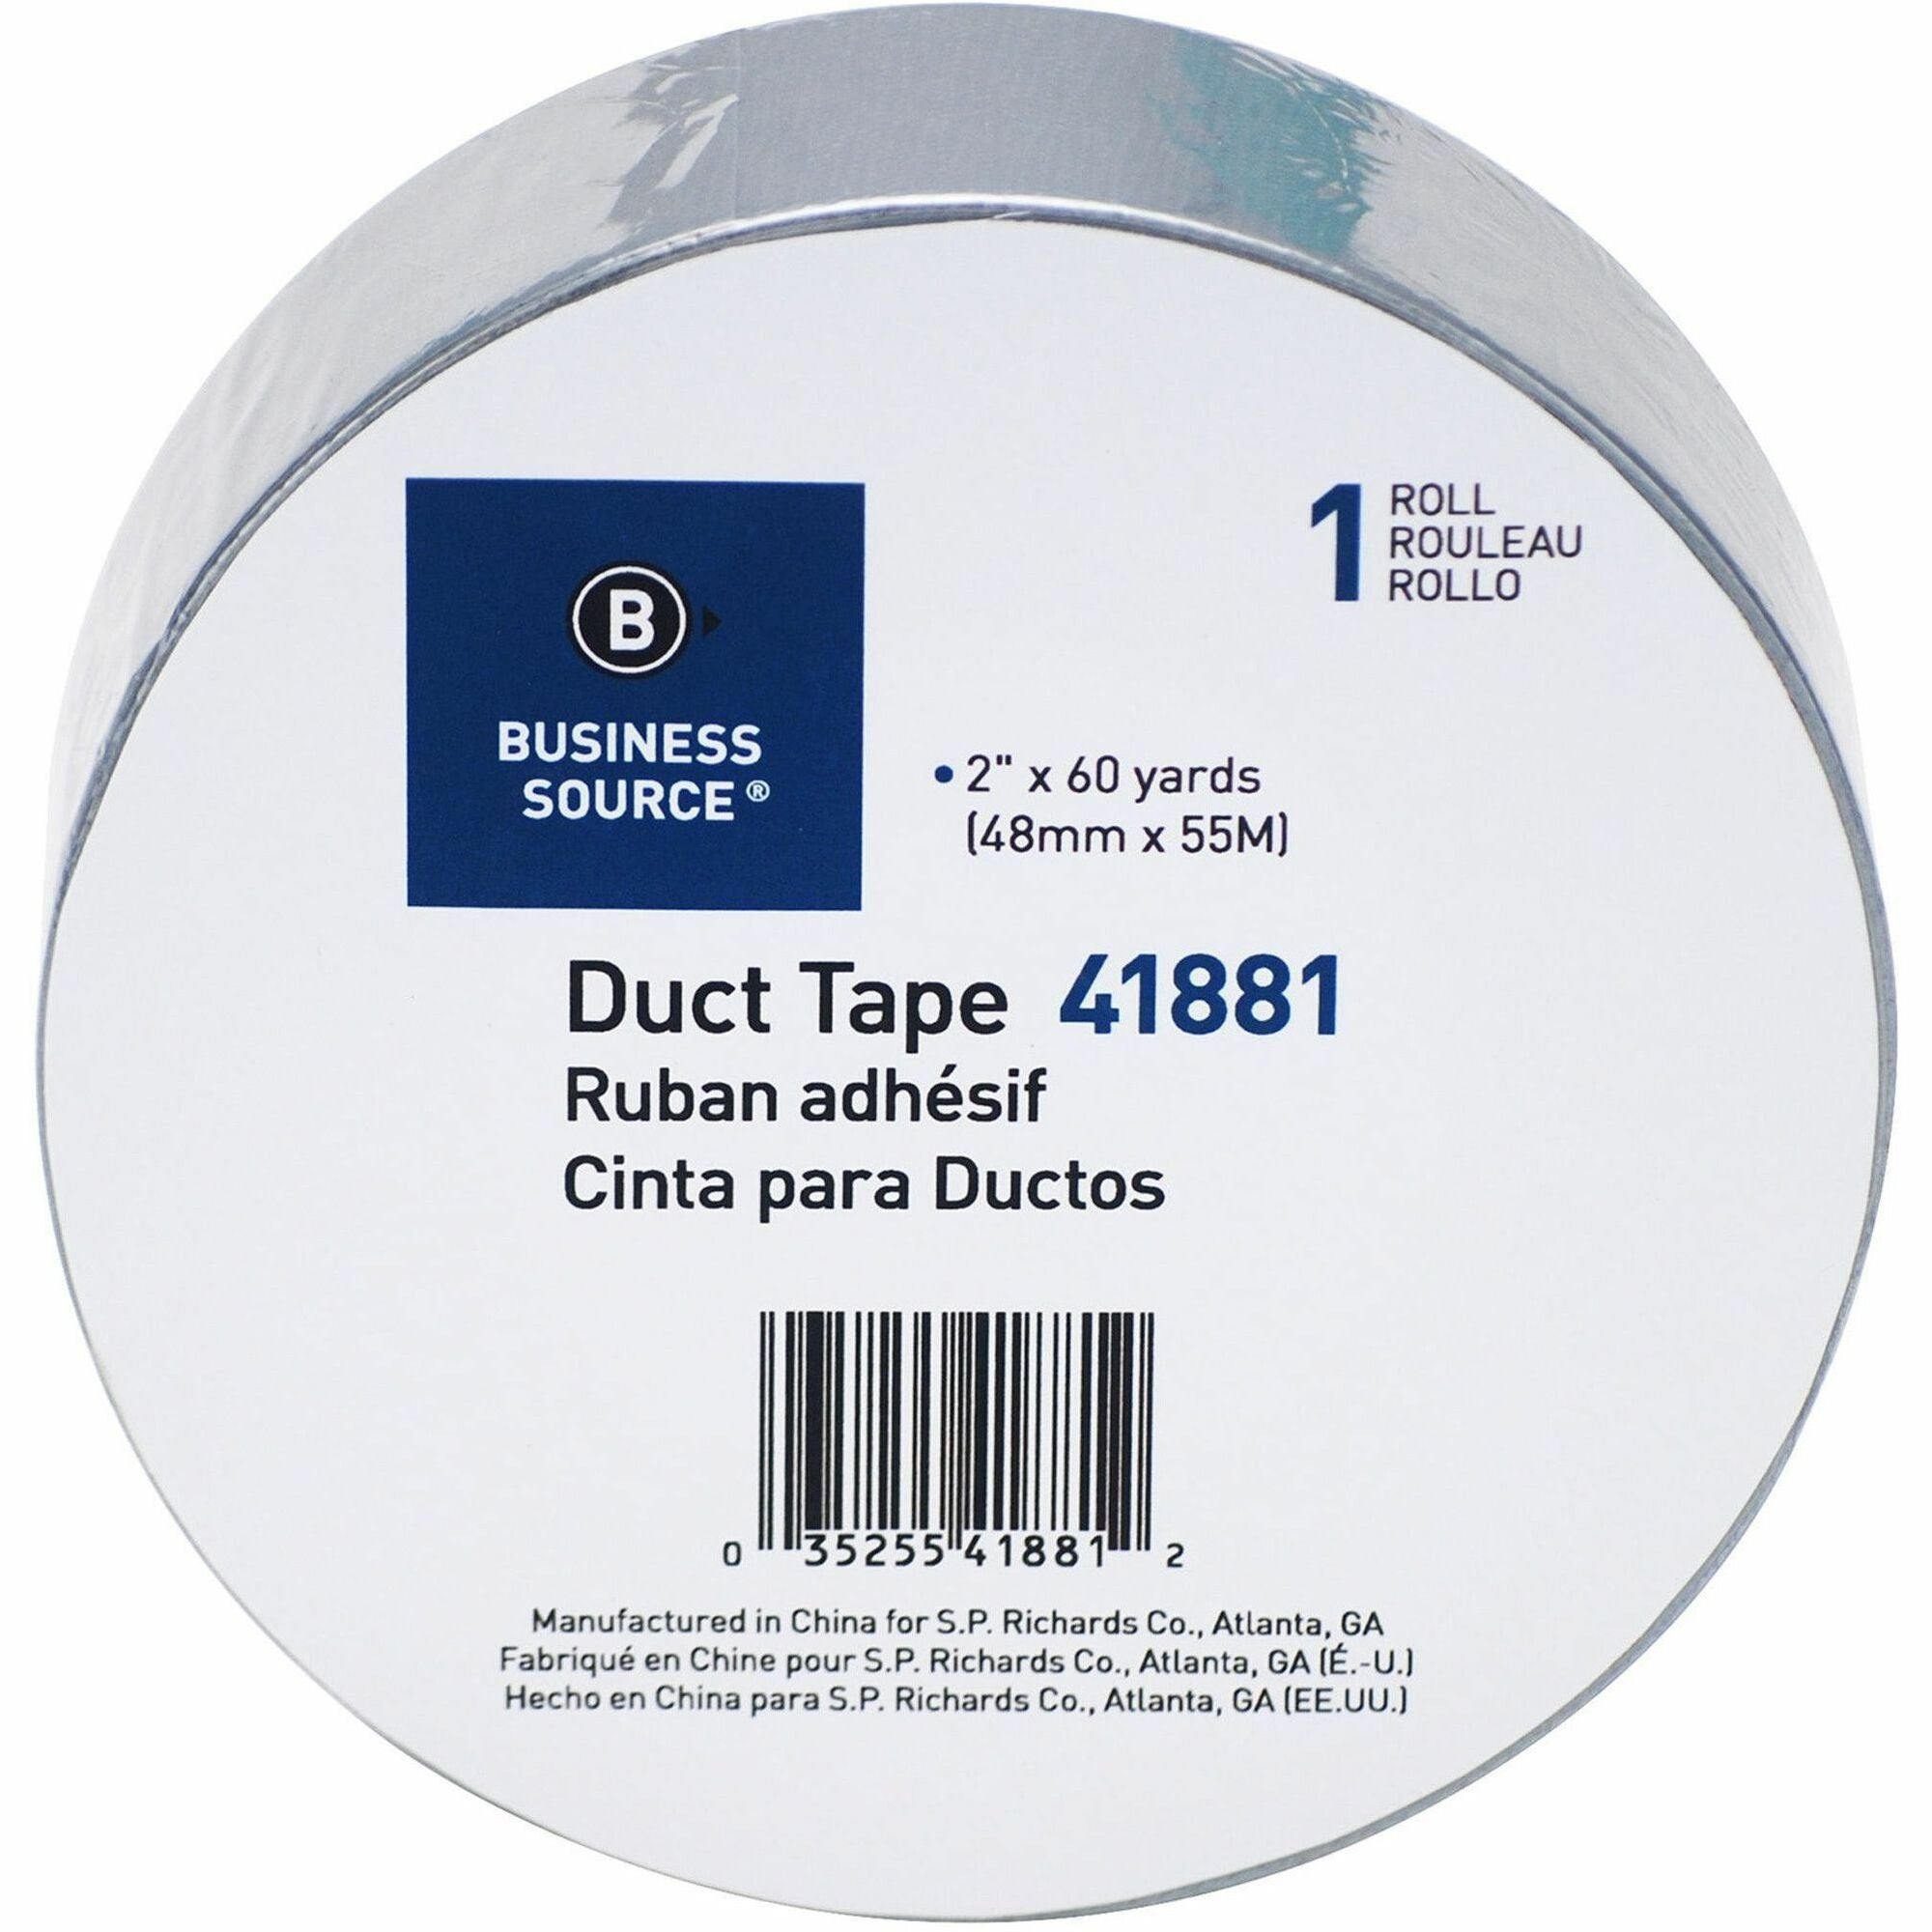 Business Source General-purpose Duct Tape - 60 yd Length x 2" Width - 9 mil Thickness - For Indoor, Outdoor, General Purpose, Wrapping, Sealing - 1 / Roll - Gray